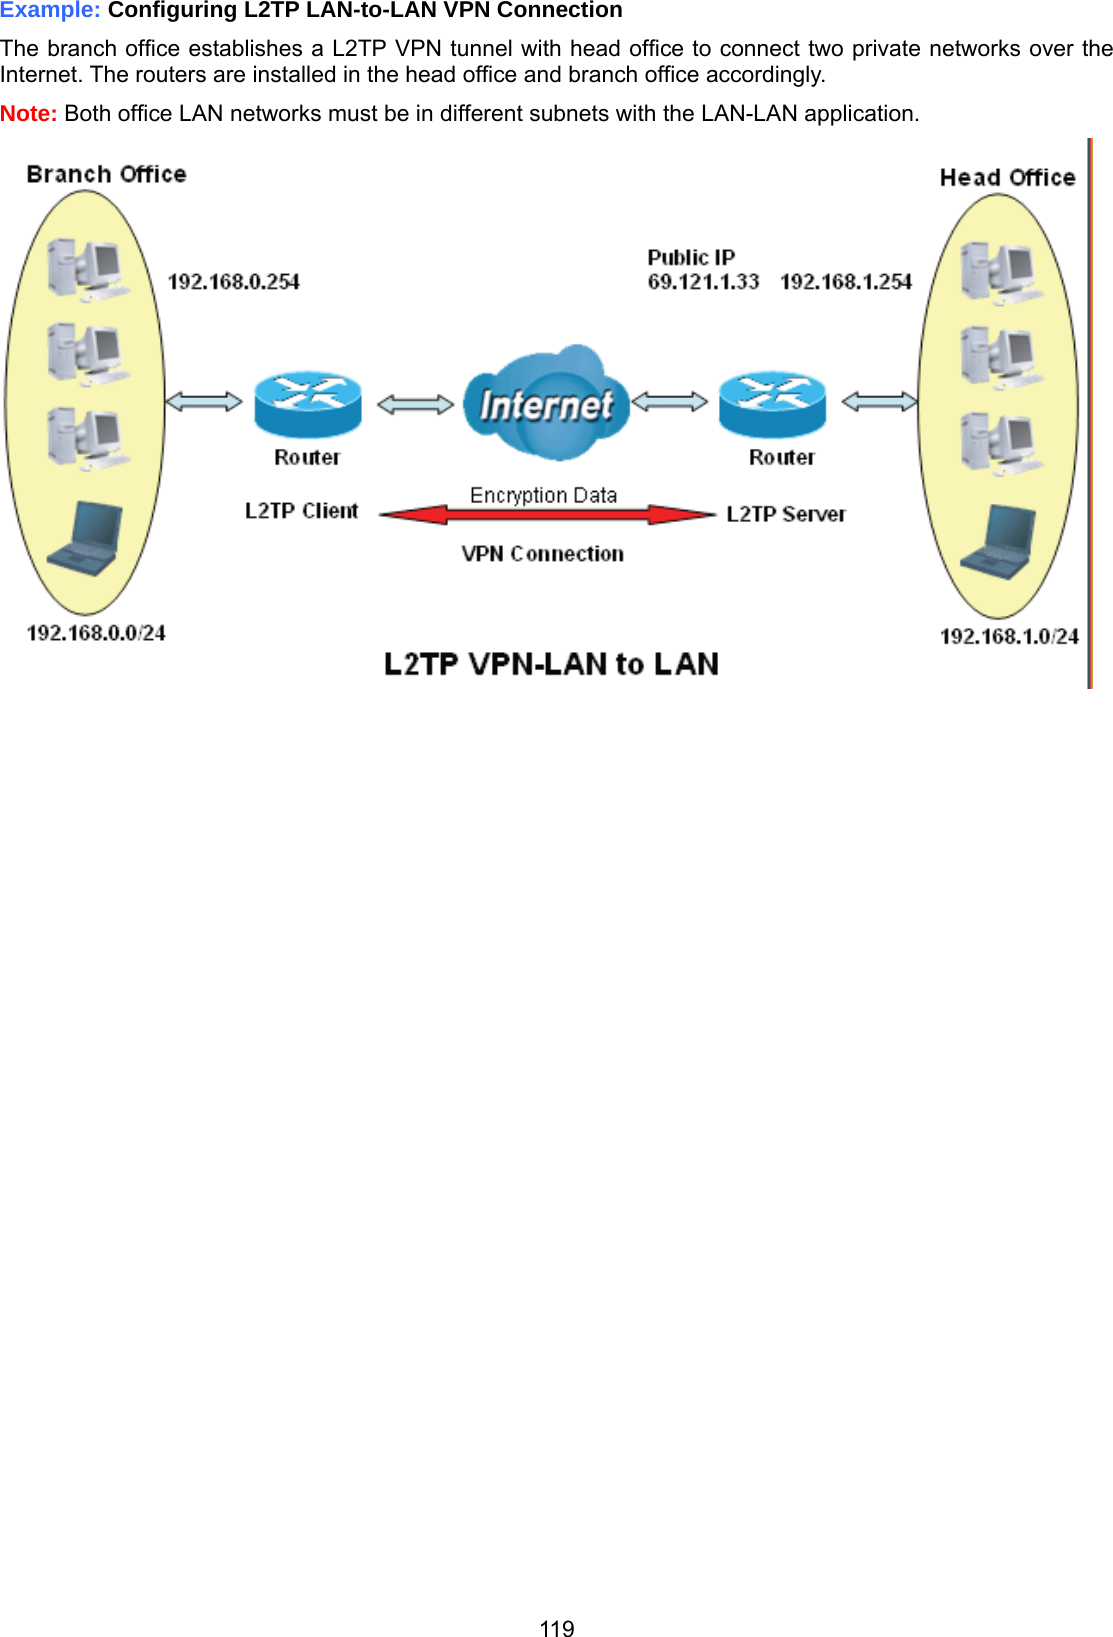 119 Example: Configuring L2TP LAN-to-LAN VPN Connection The branch office establishes a L2TP VPN tunnel with head office to connect two private networks over the Internet. The routers are installed in the head office and branch office accordingly. Note: Both office LAN networks must be in different subnets with the LAN-LAN application.   